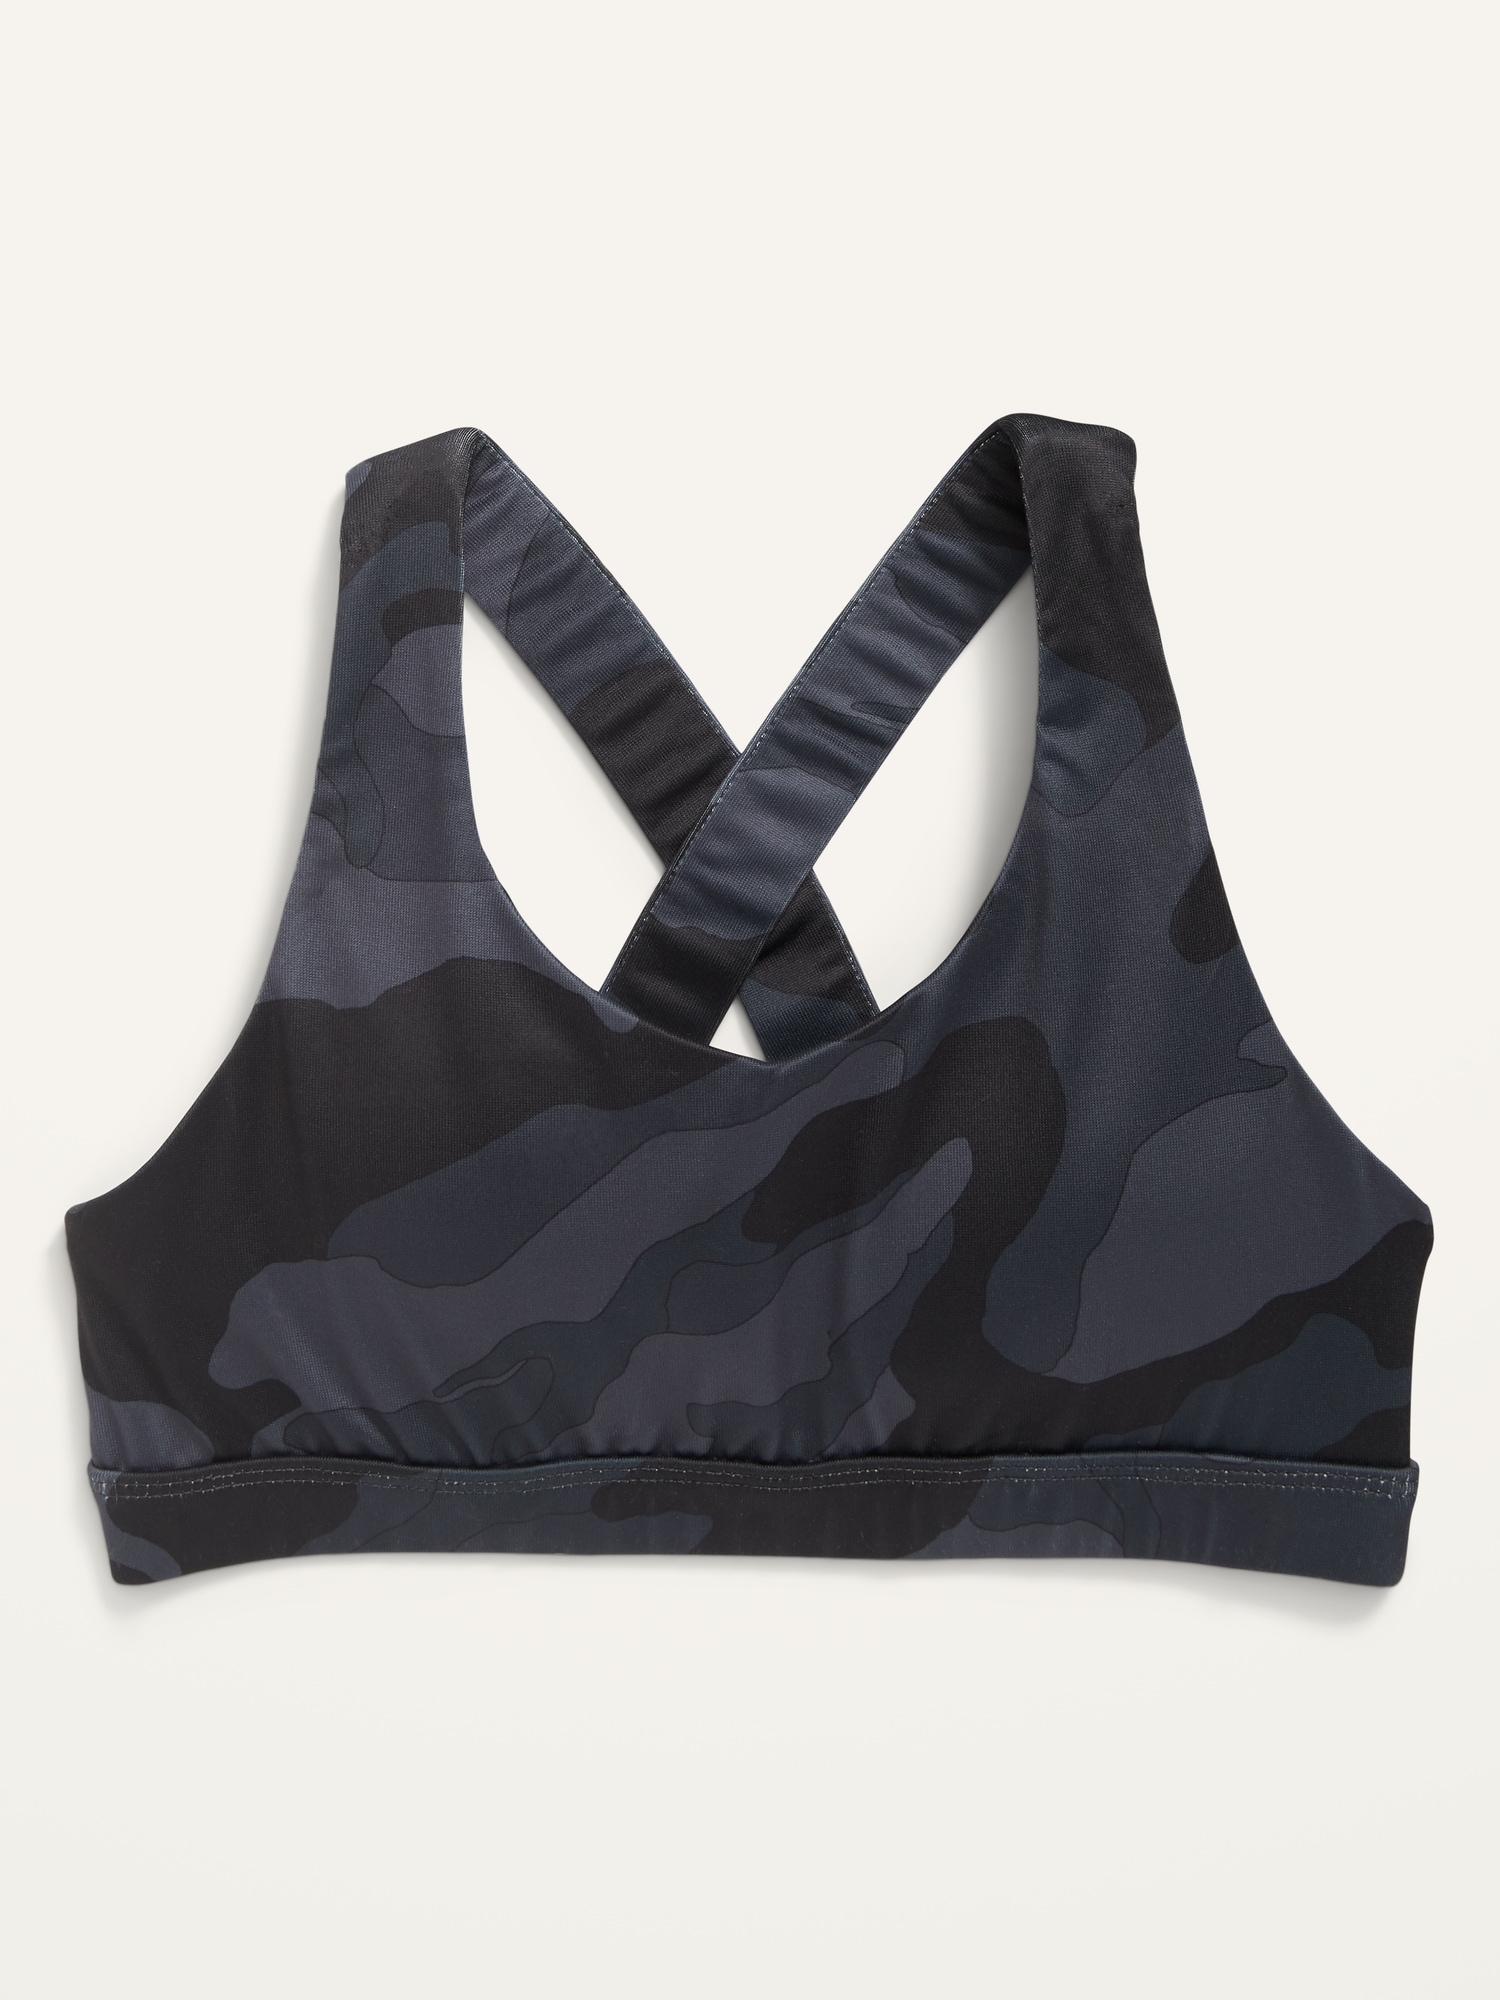 Old Navy Women's Lightweight Sports Bra NEW Size Small - $17 New With Tags  - From Selin